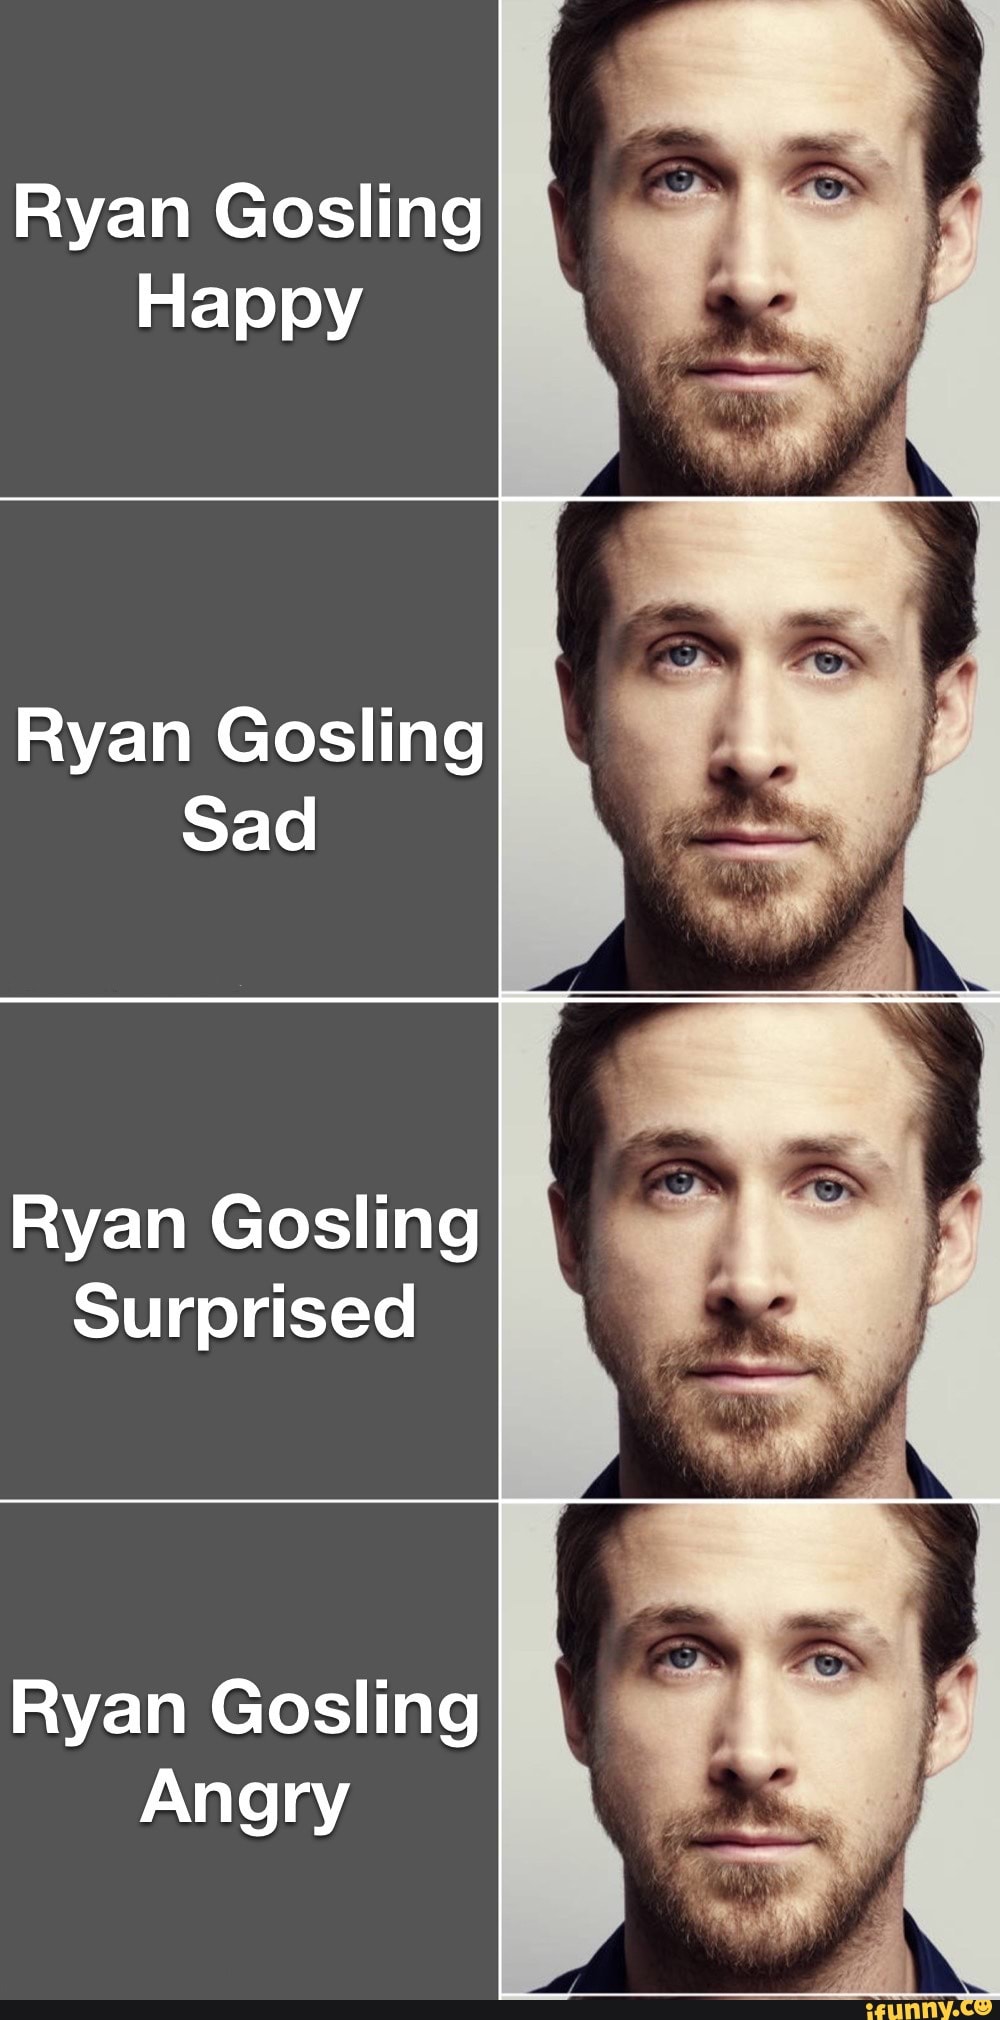 Ryan Gosling Happy Ryan Gosling Sad Ryan Gosling Surprised Ryan Gosling Angry Ifunny 2155